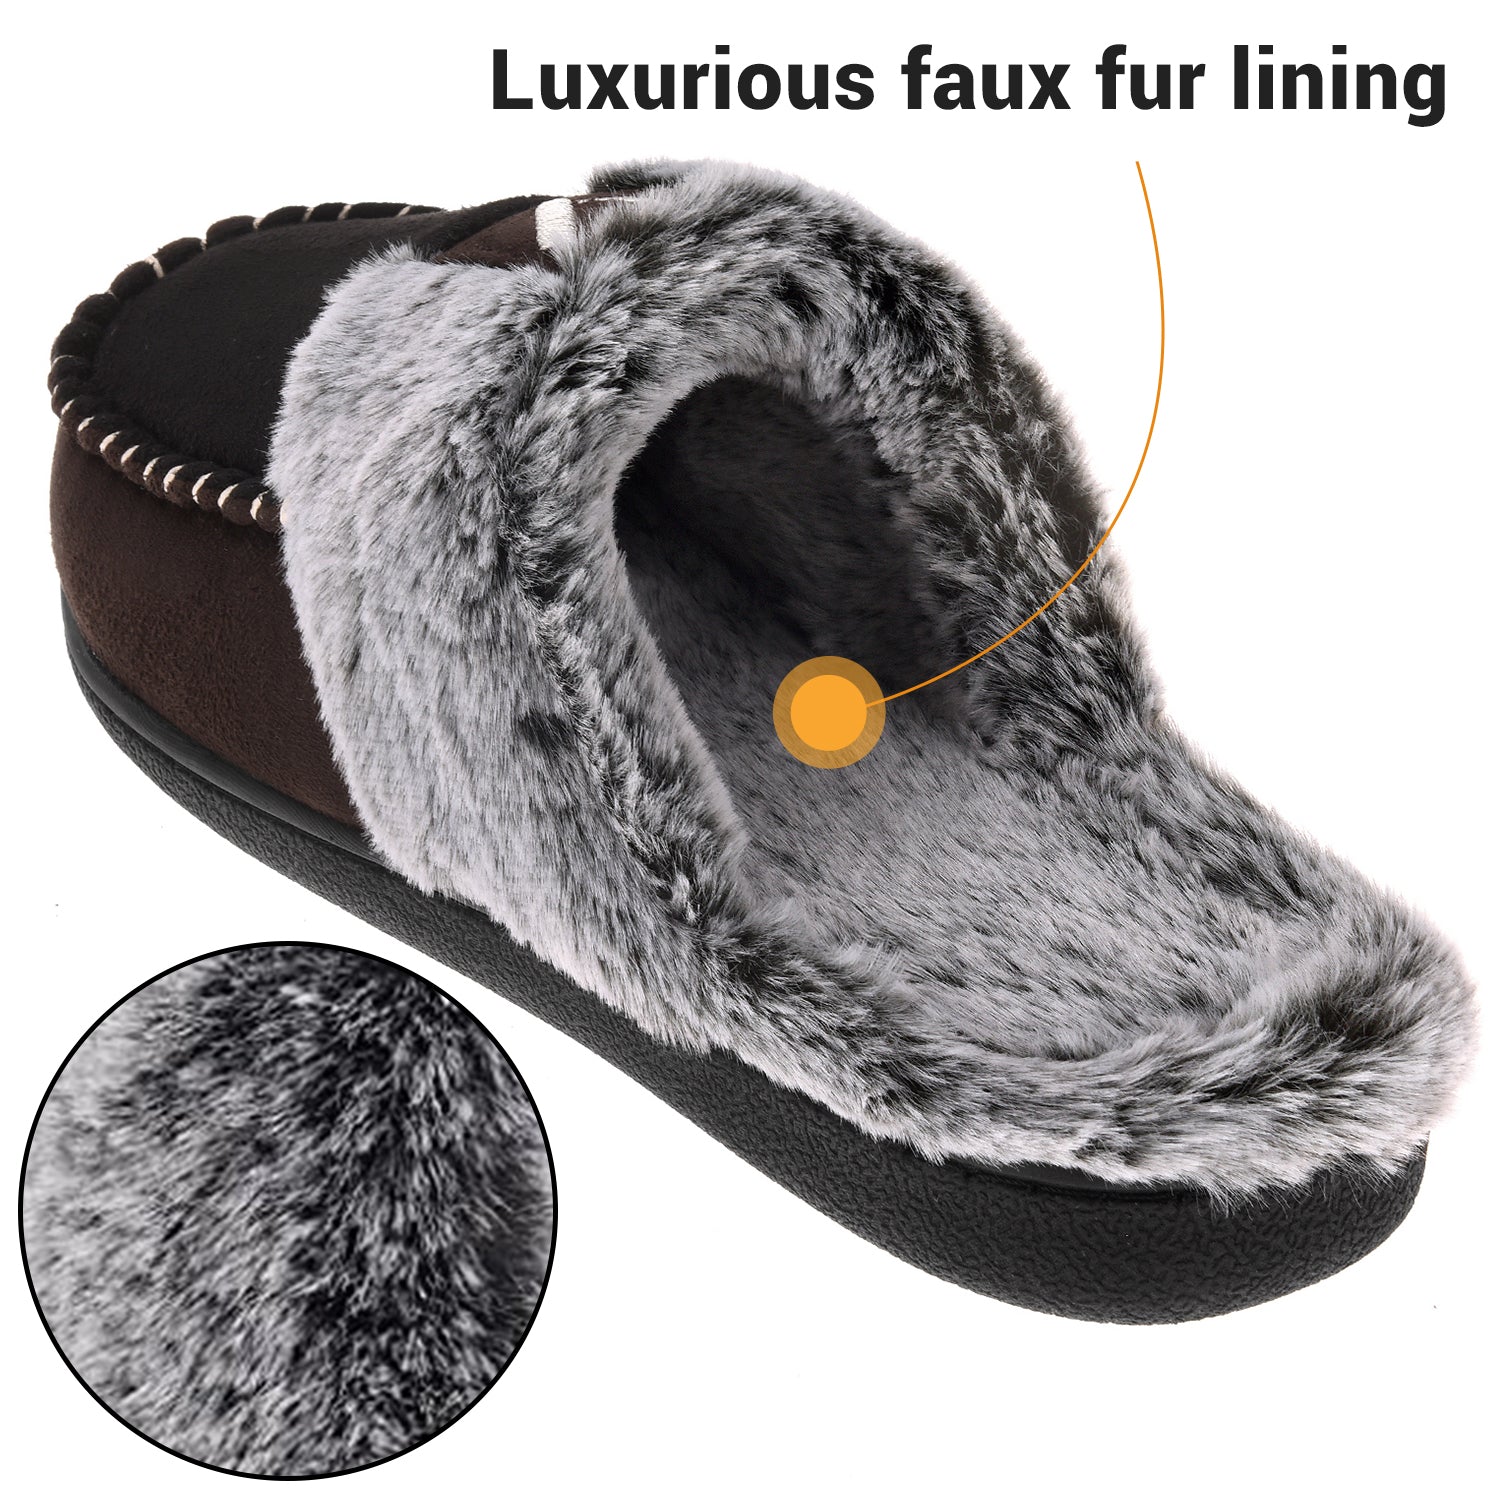  VONMAY Men's Memory Foam Fuzzy Slippers Slip On Scuff House  Shoes Moccasin Faux Fur Plush Fleece Lining Indoor Outdoor Winter Warm 